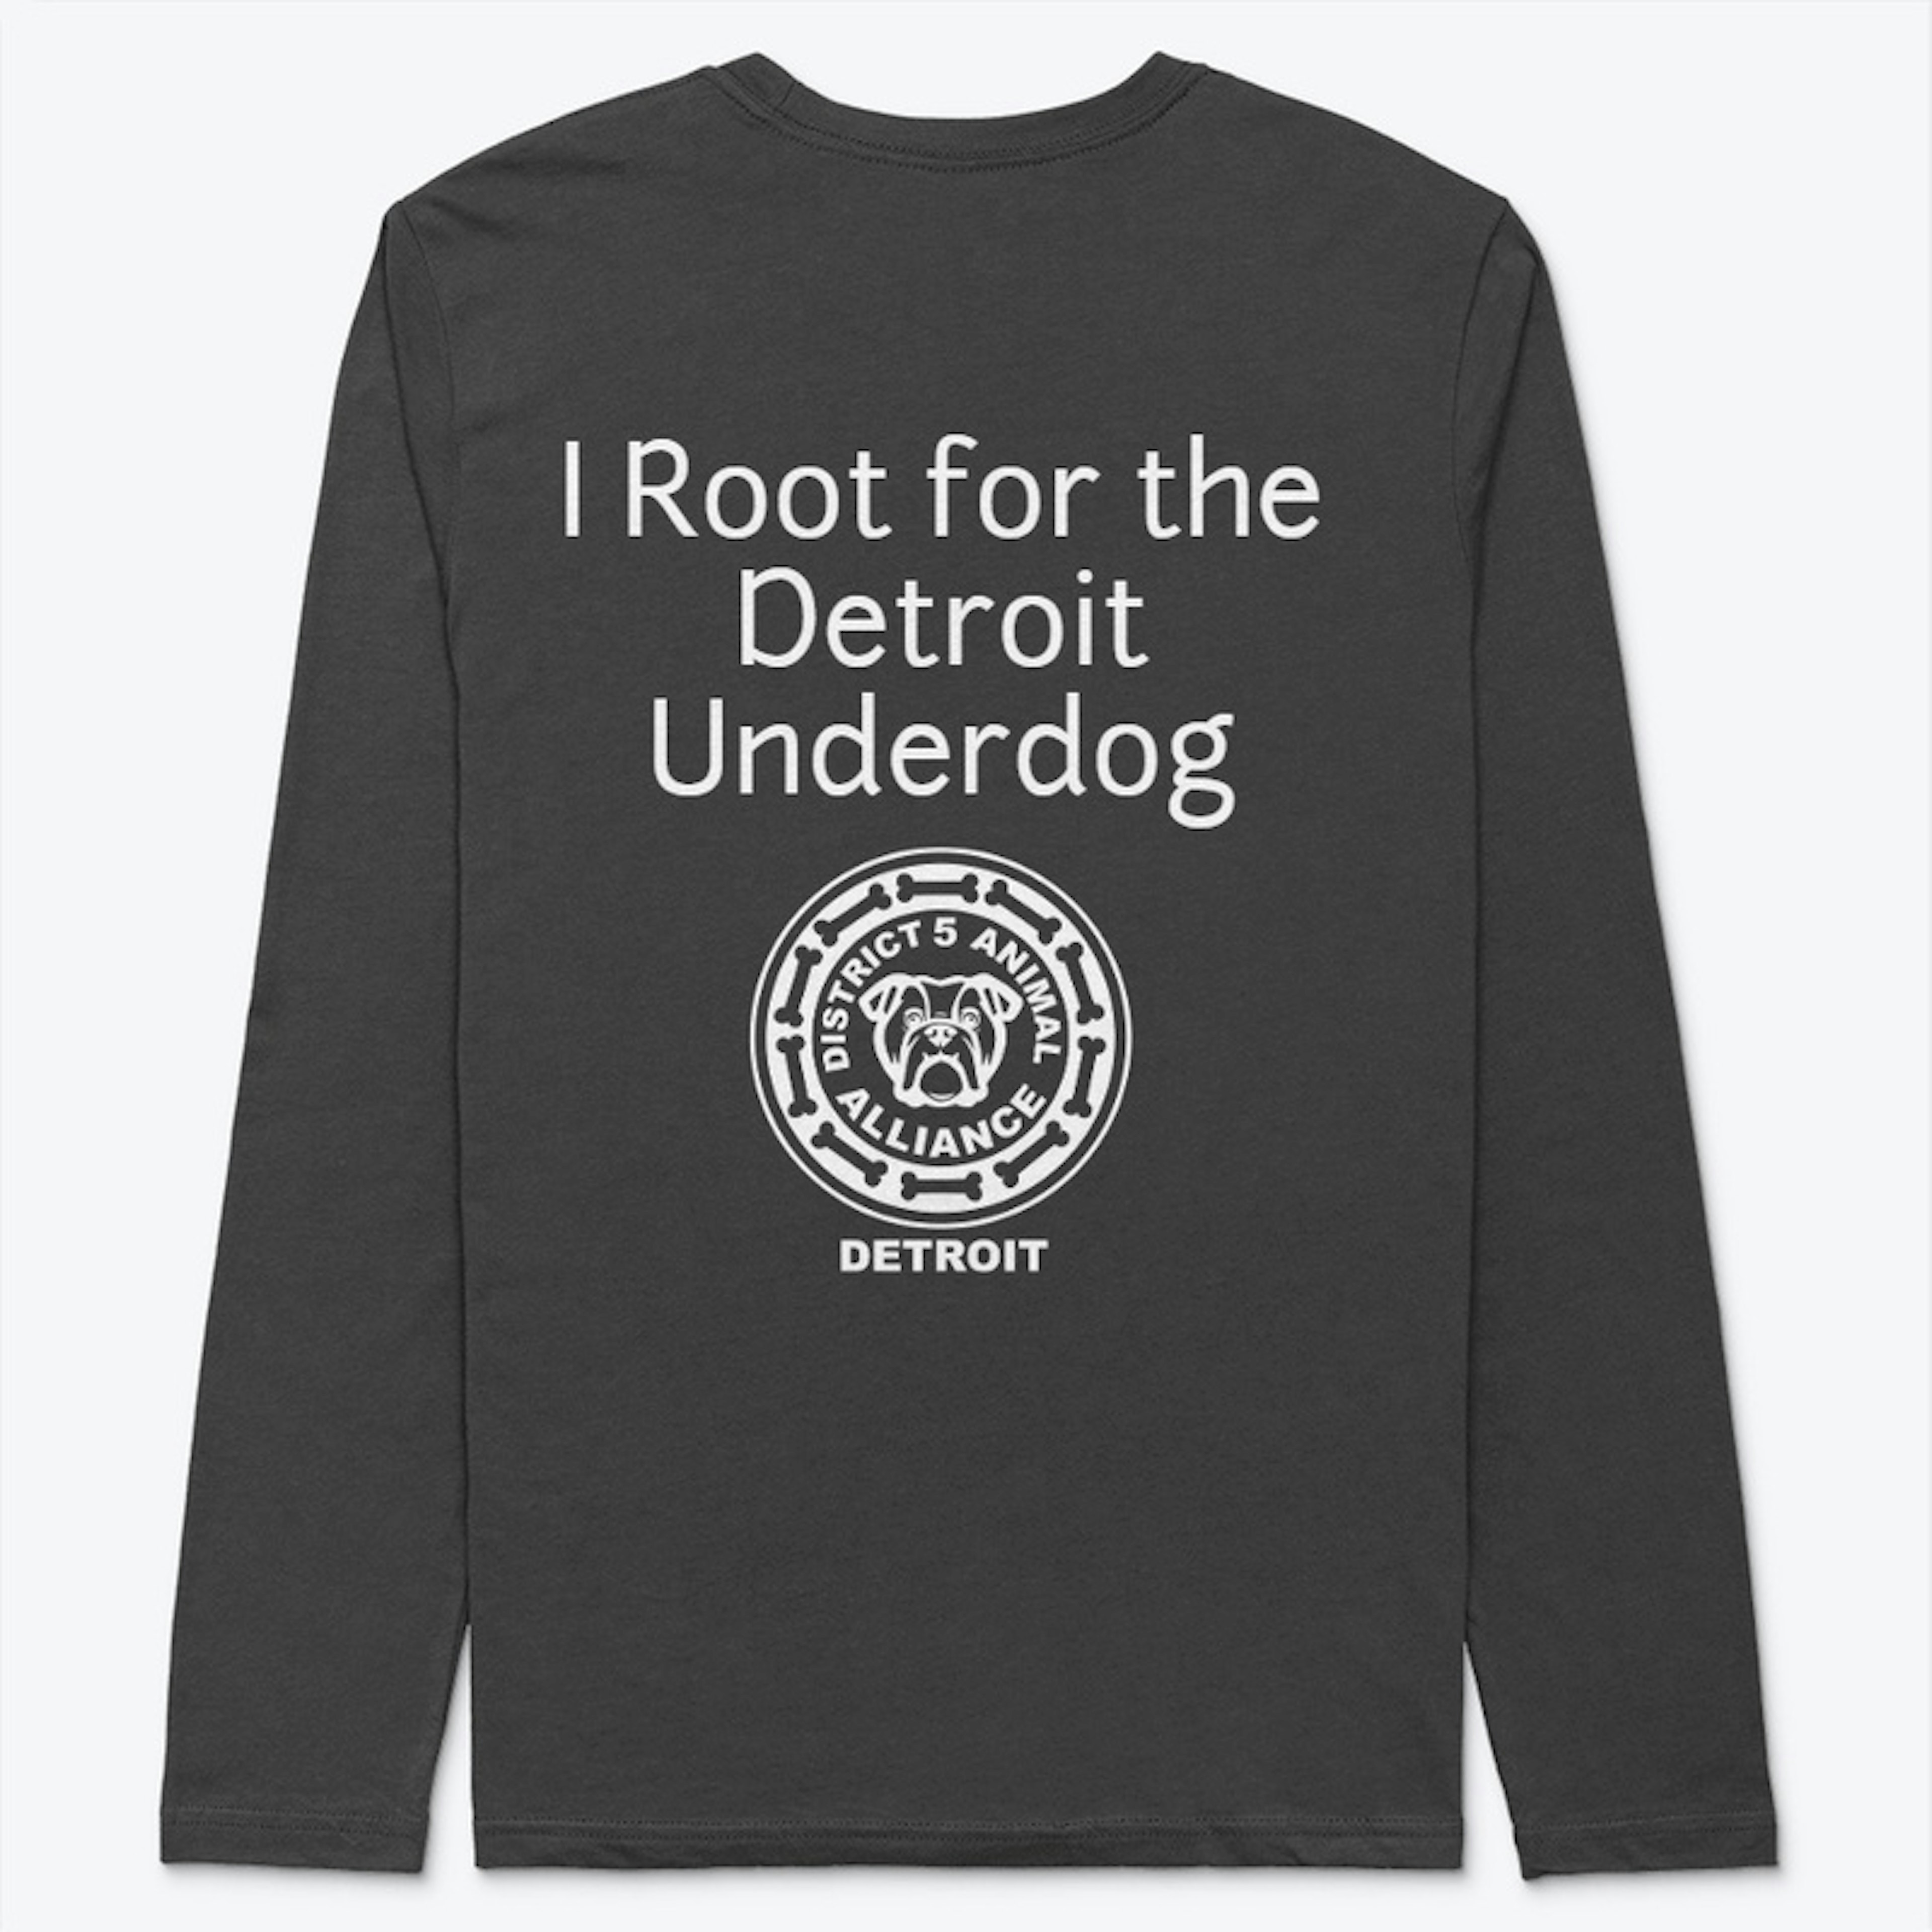 Root for the Detroit Underdog 2